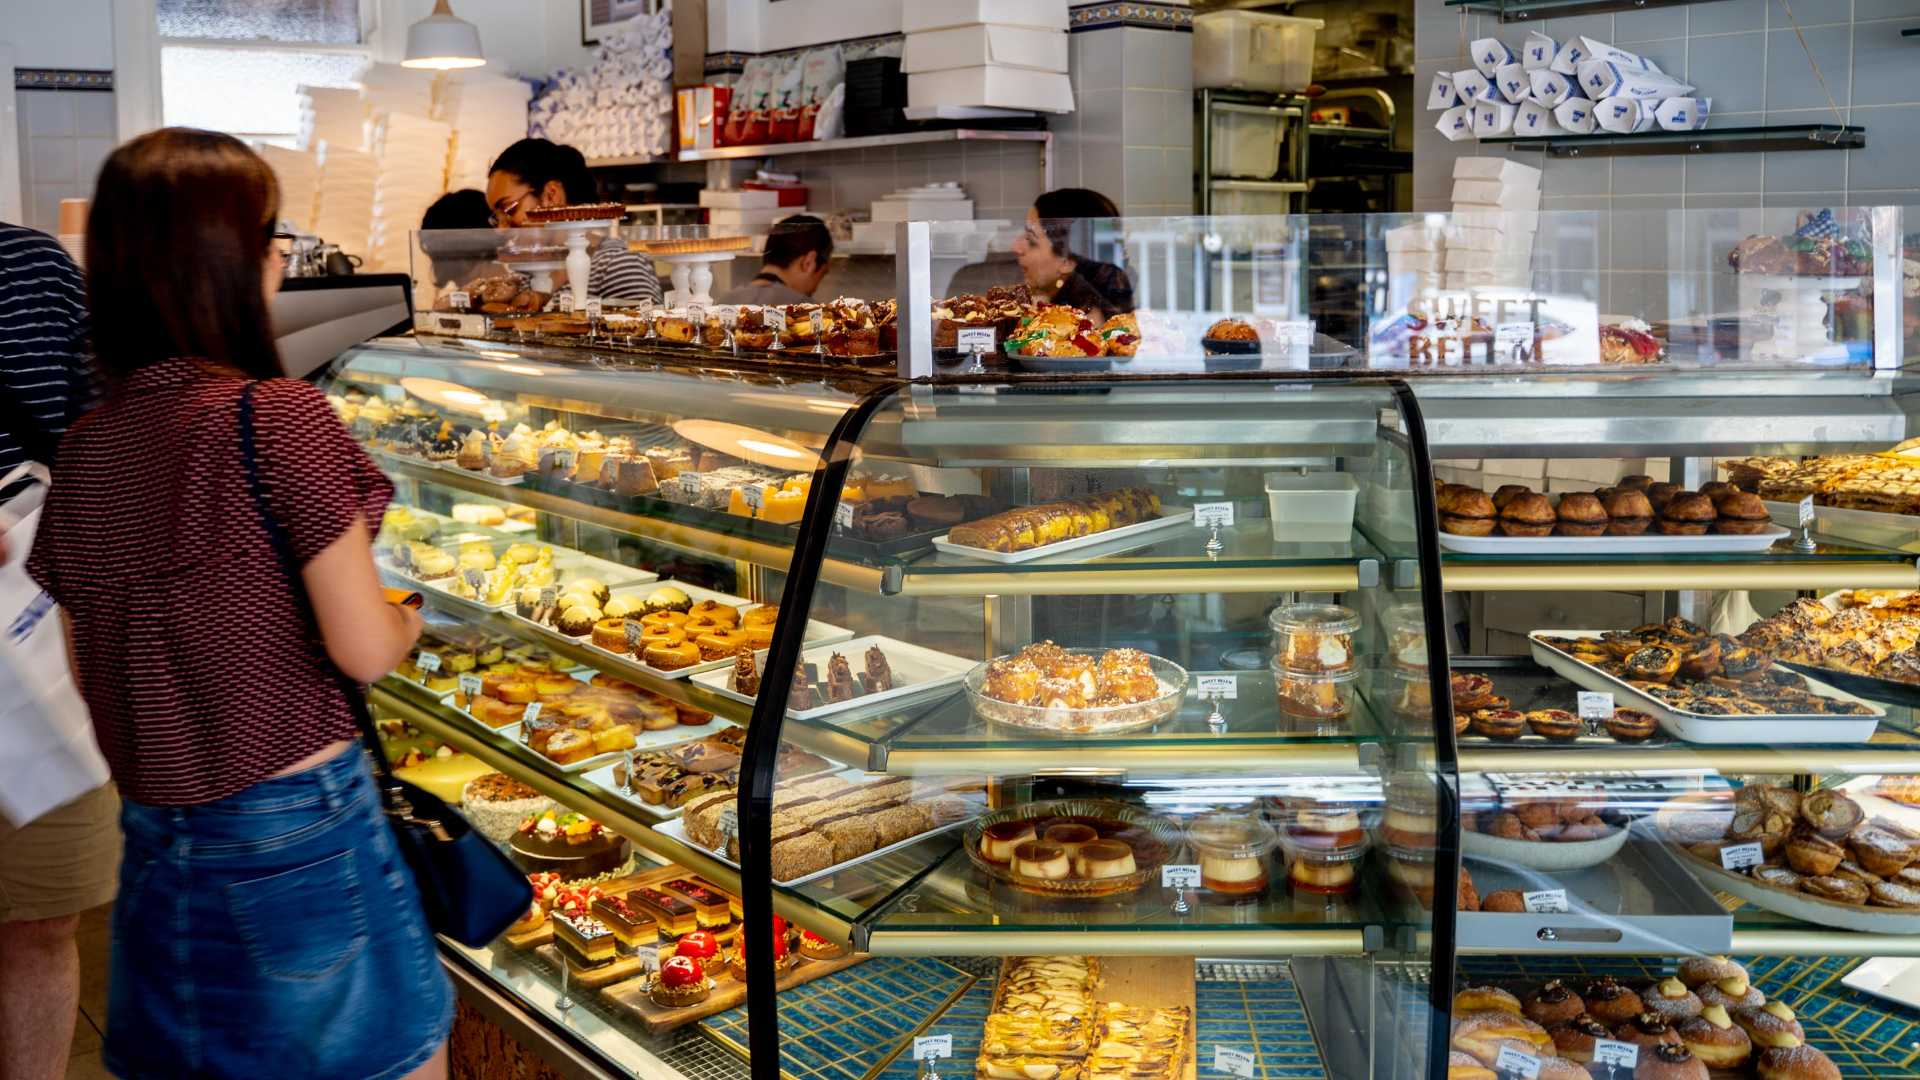 The counter at Sweet Bedlem - full of cakes and pastries - home to some of the best donuts in sydney